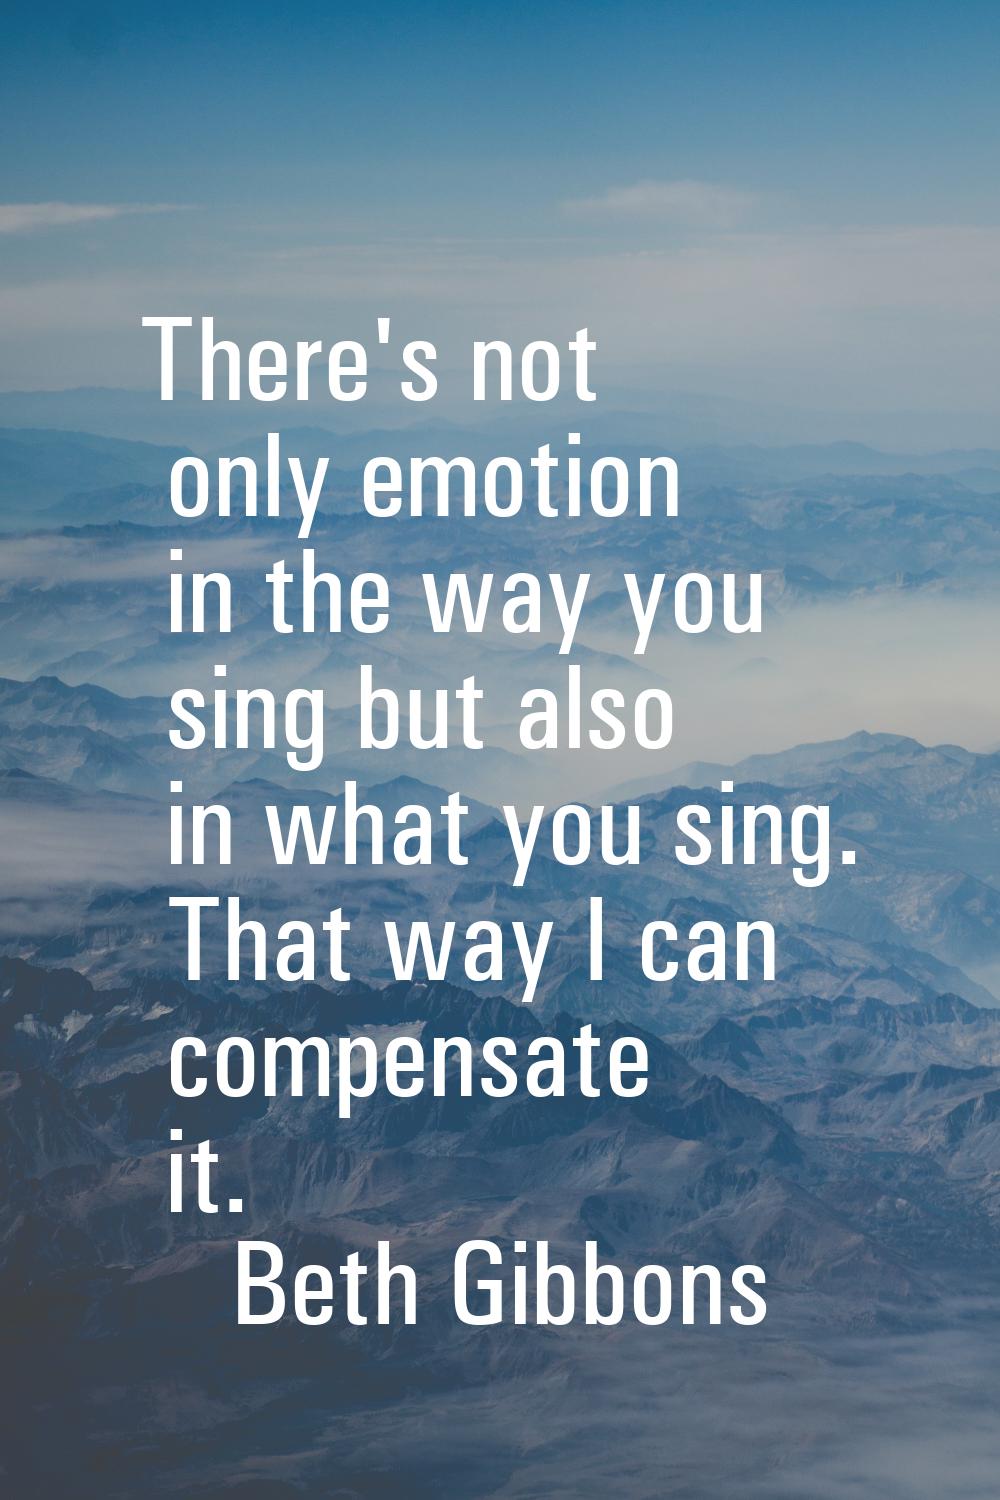 There's not only emotion in the way you sing but also in what you sing. That way I can compensate i